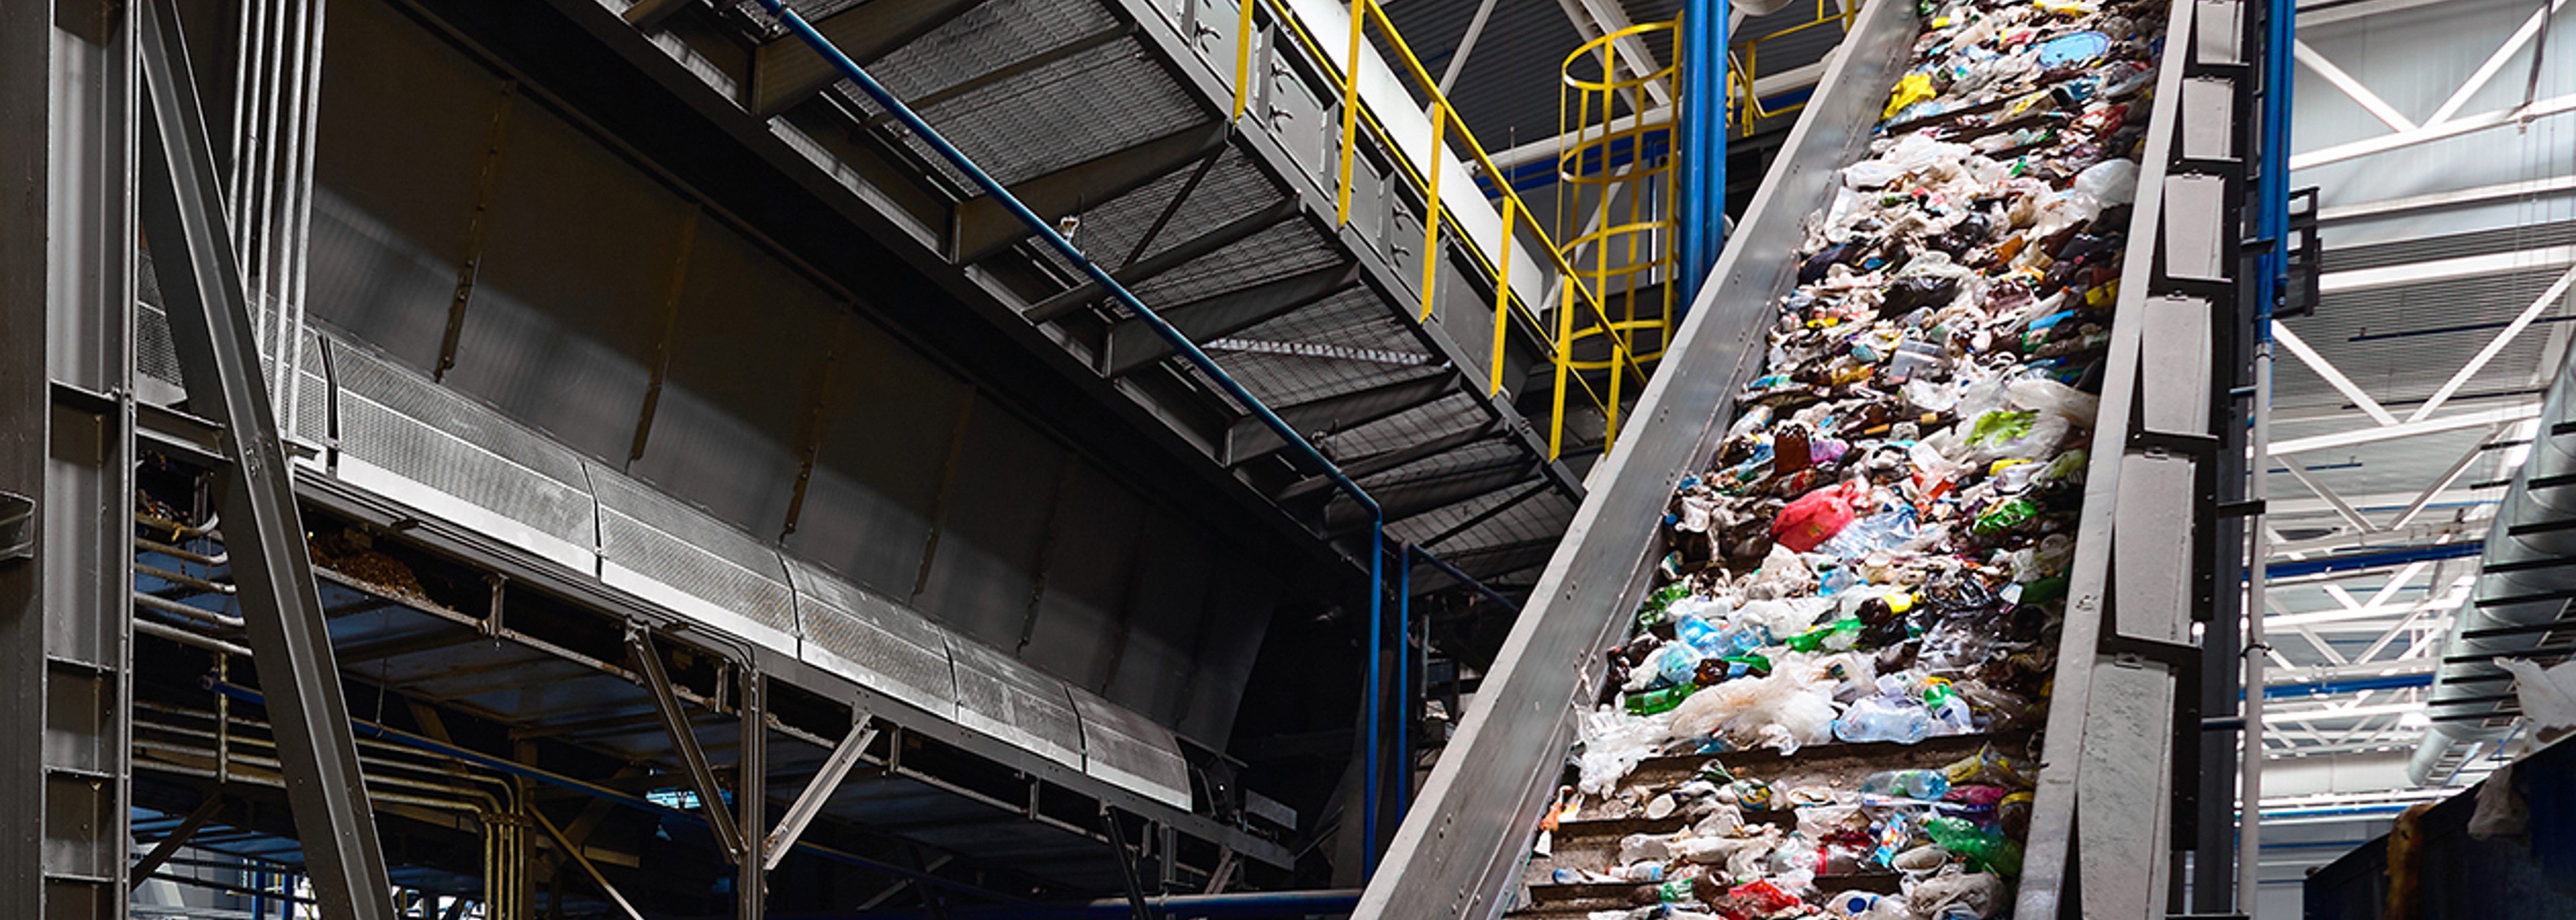 EC’s push to keep waste shipments within Europe proves divisive